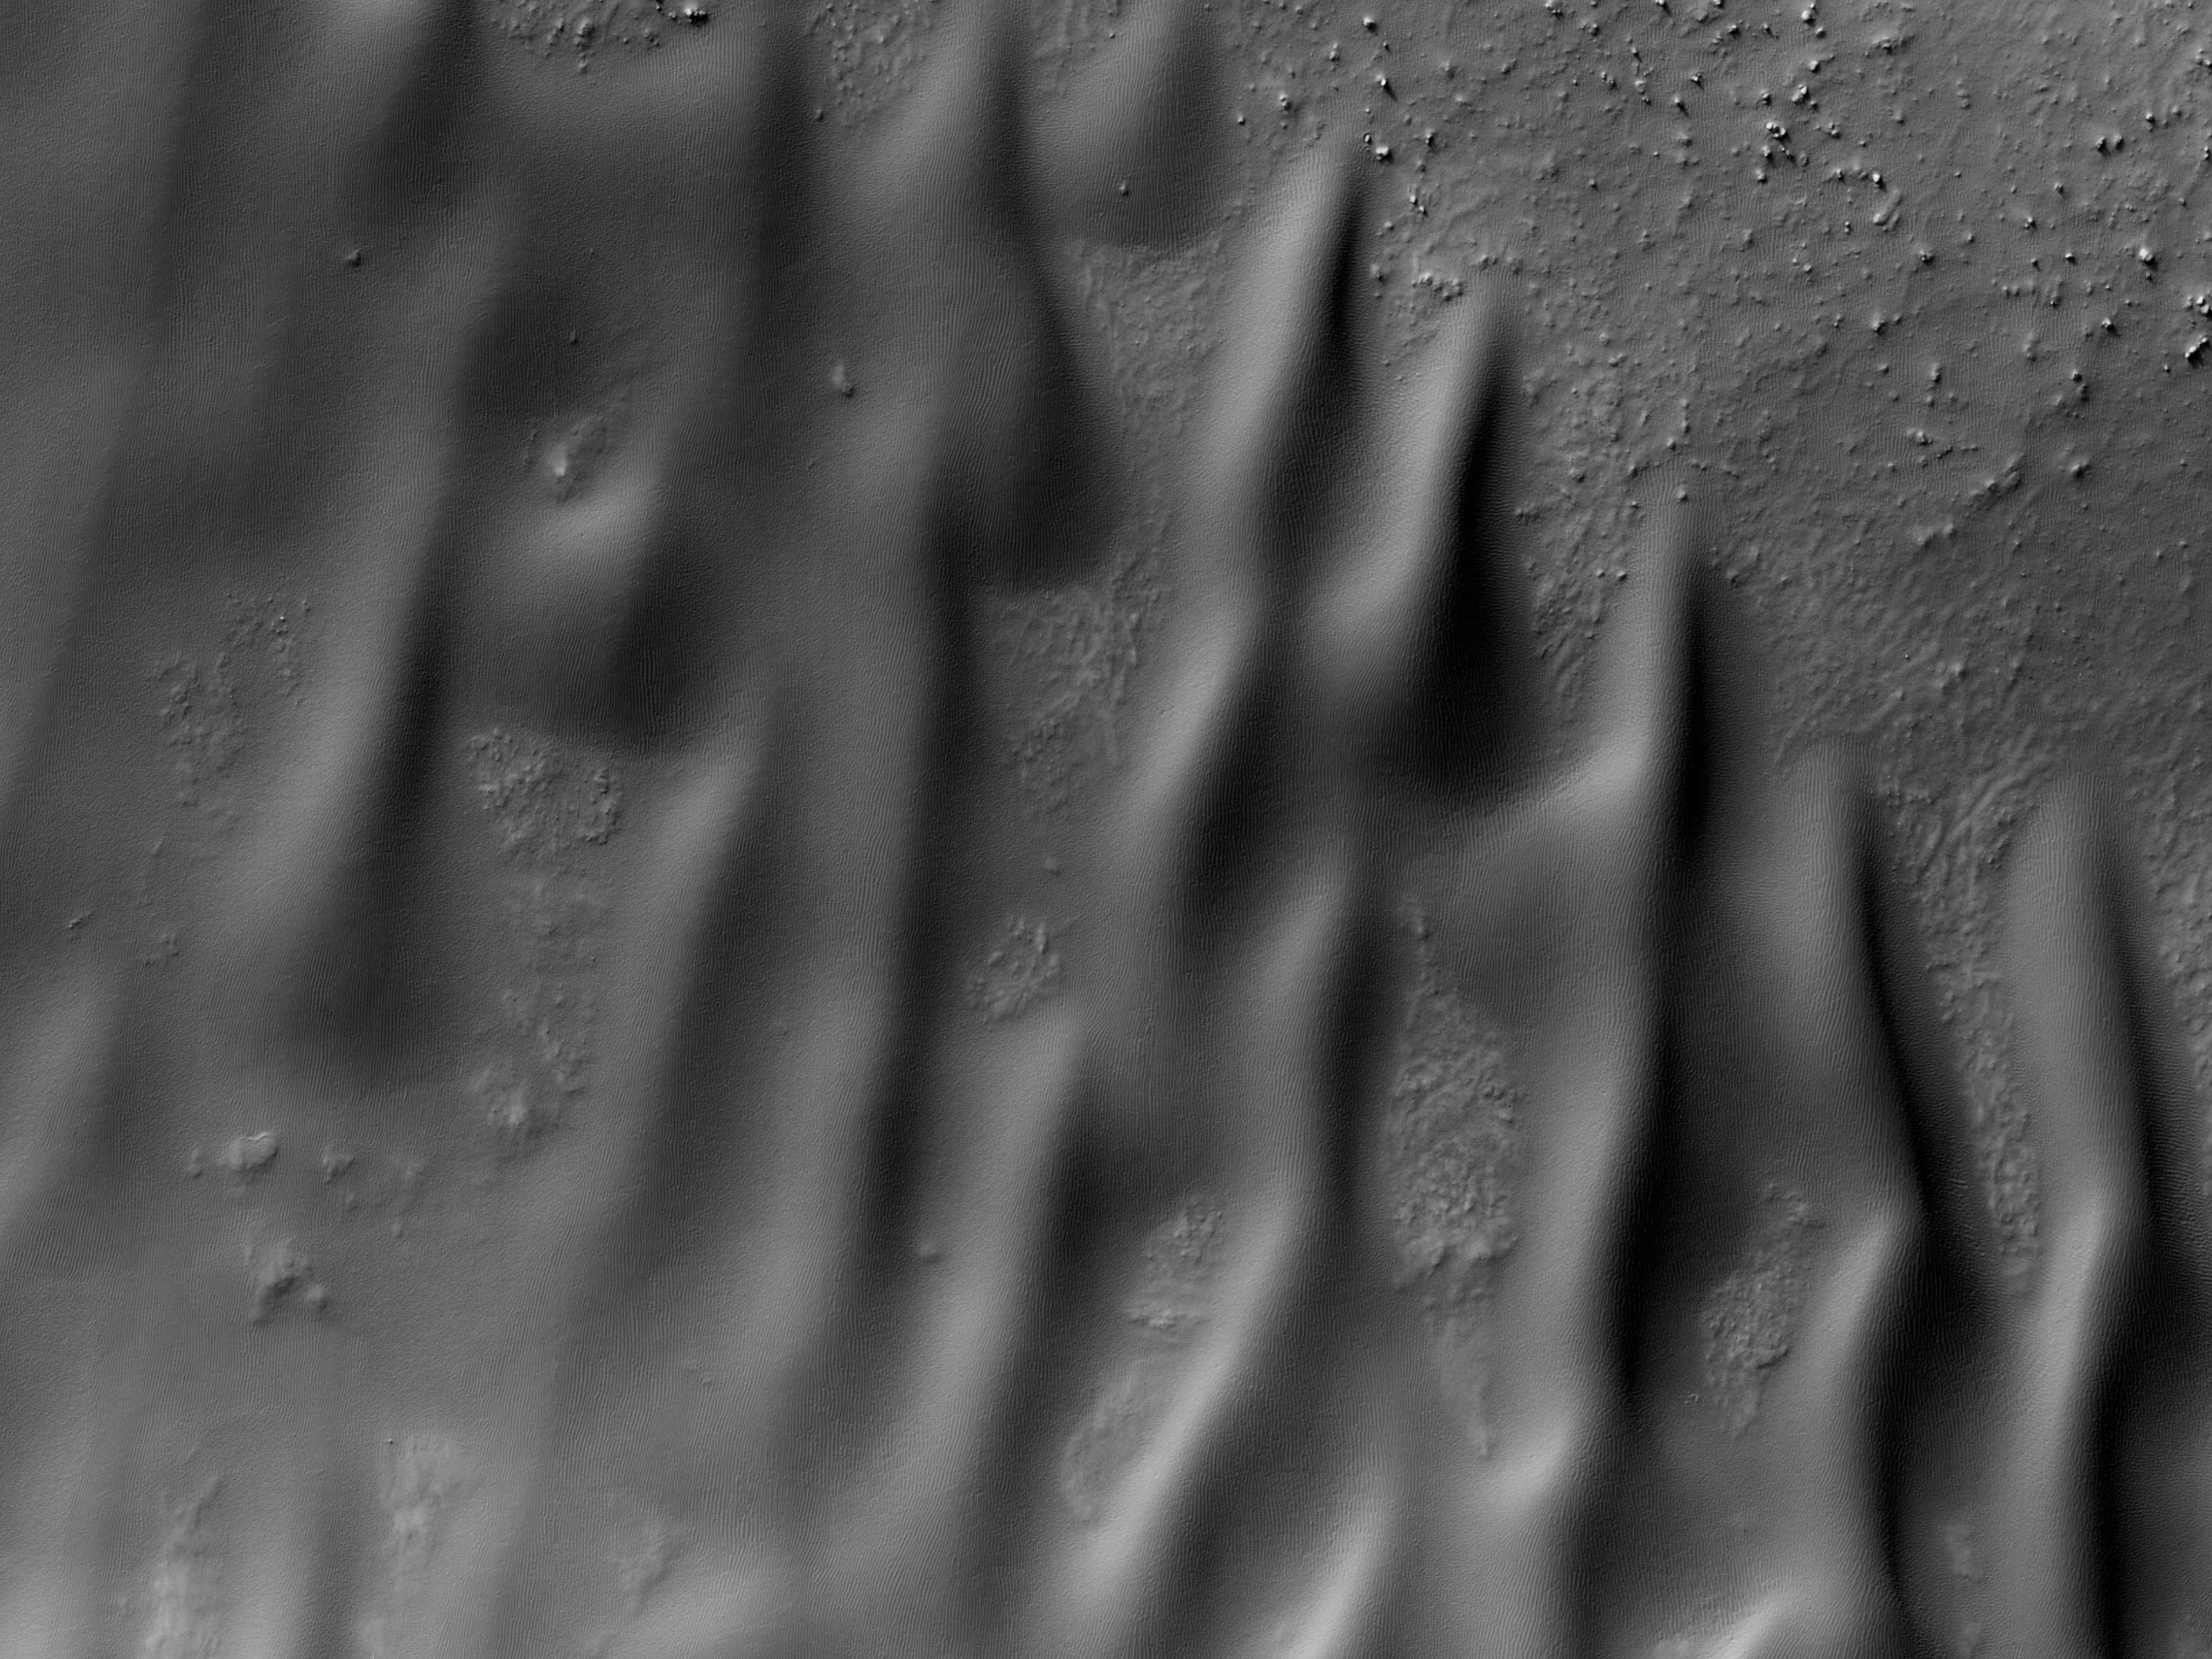 Dune Change Detection West of Lowell Crater